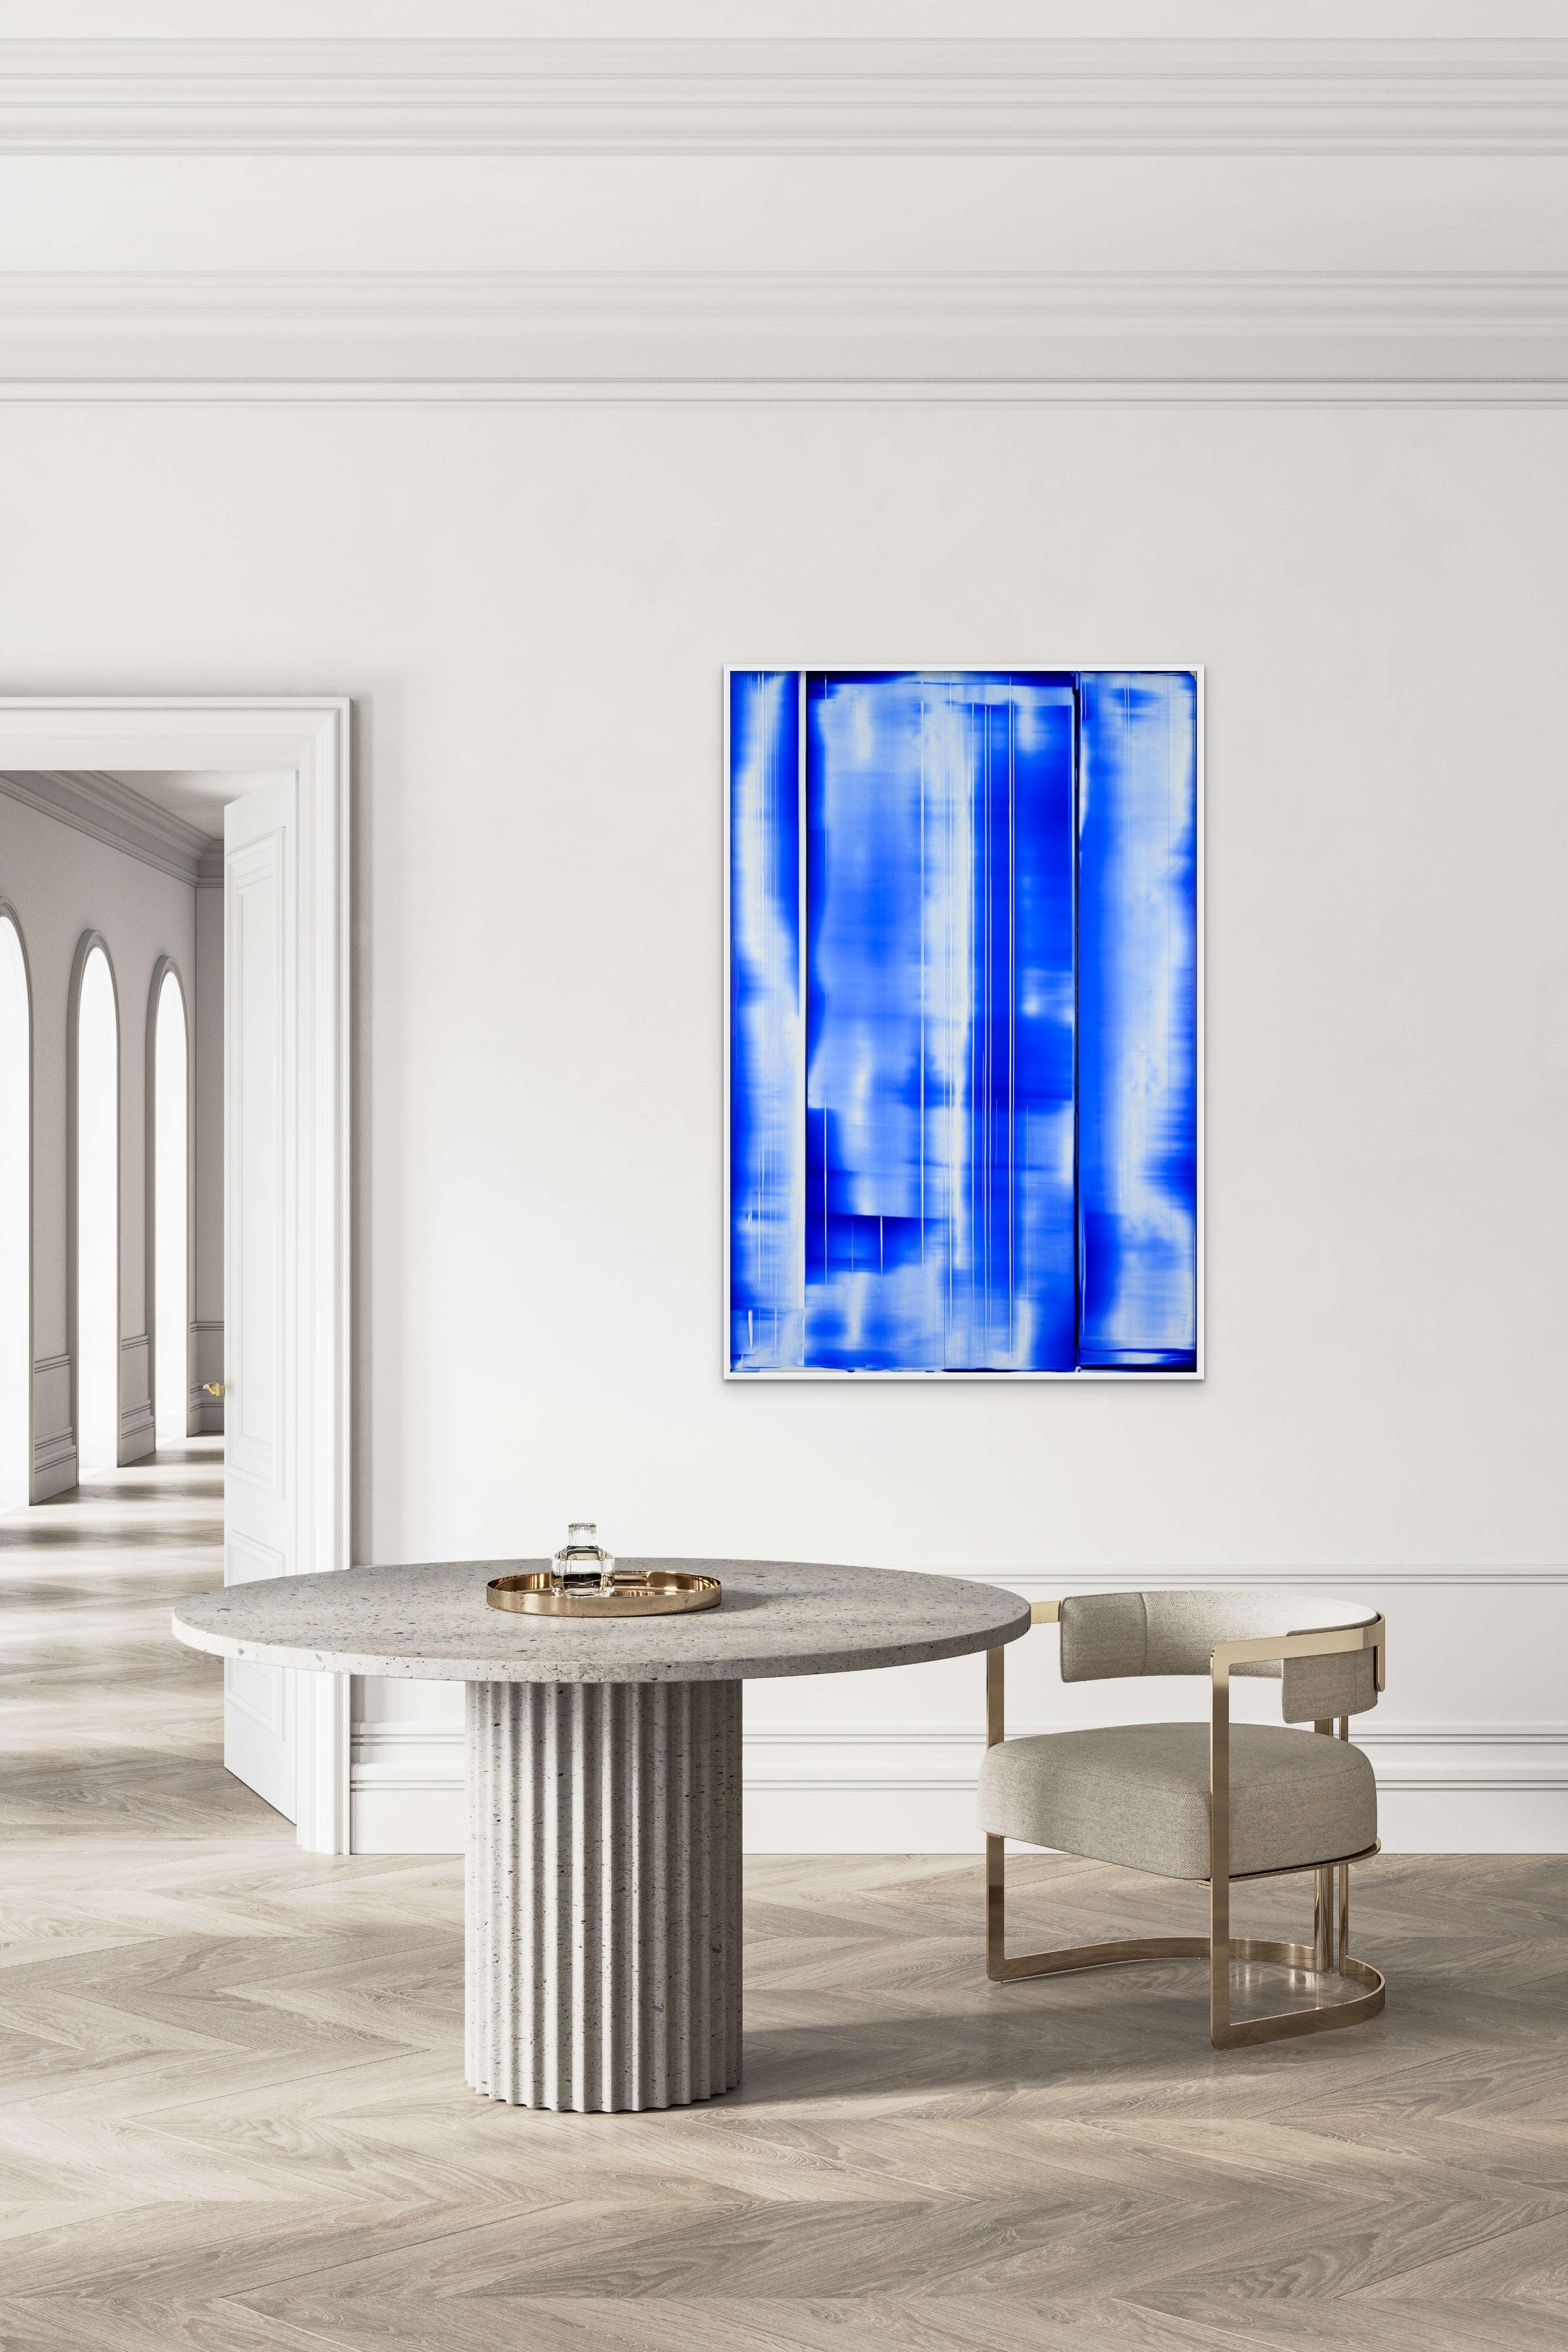 This Room With Ocean View (Abstract painting) - Painting by Alex K. Smith